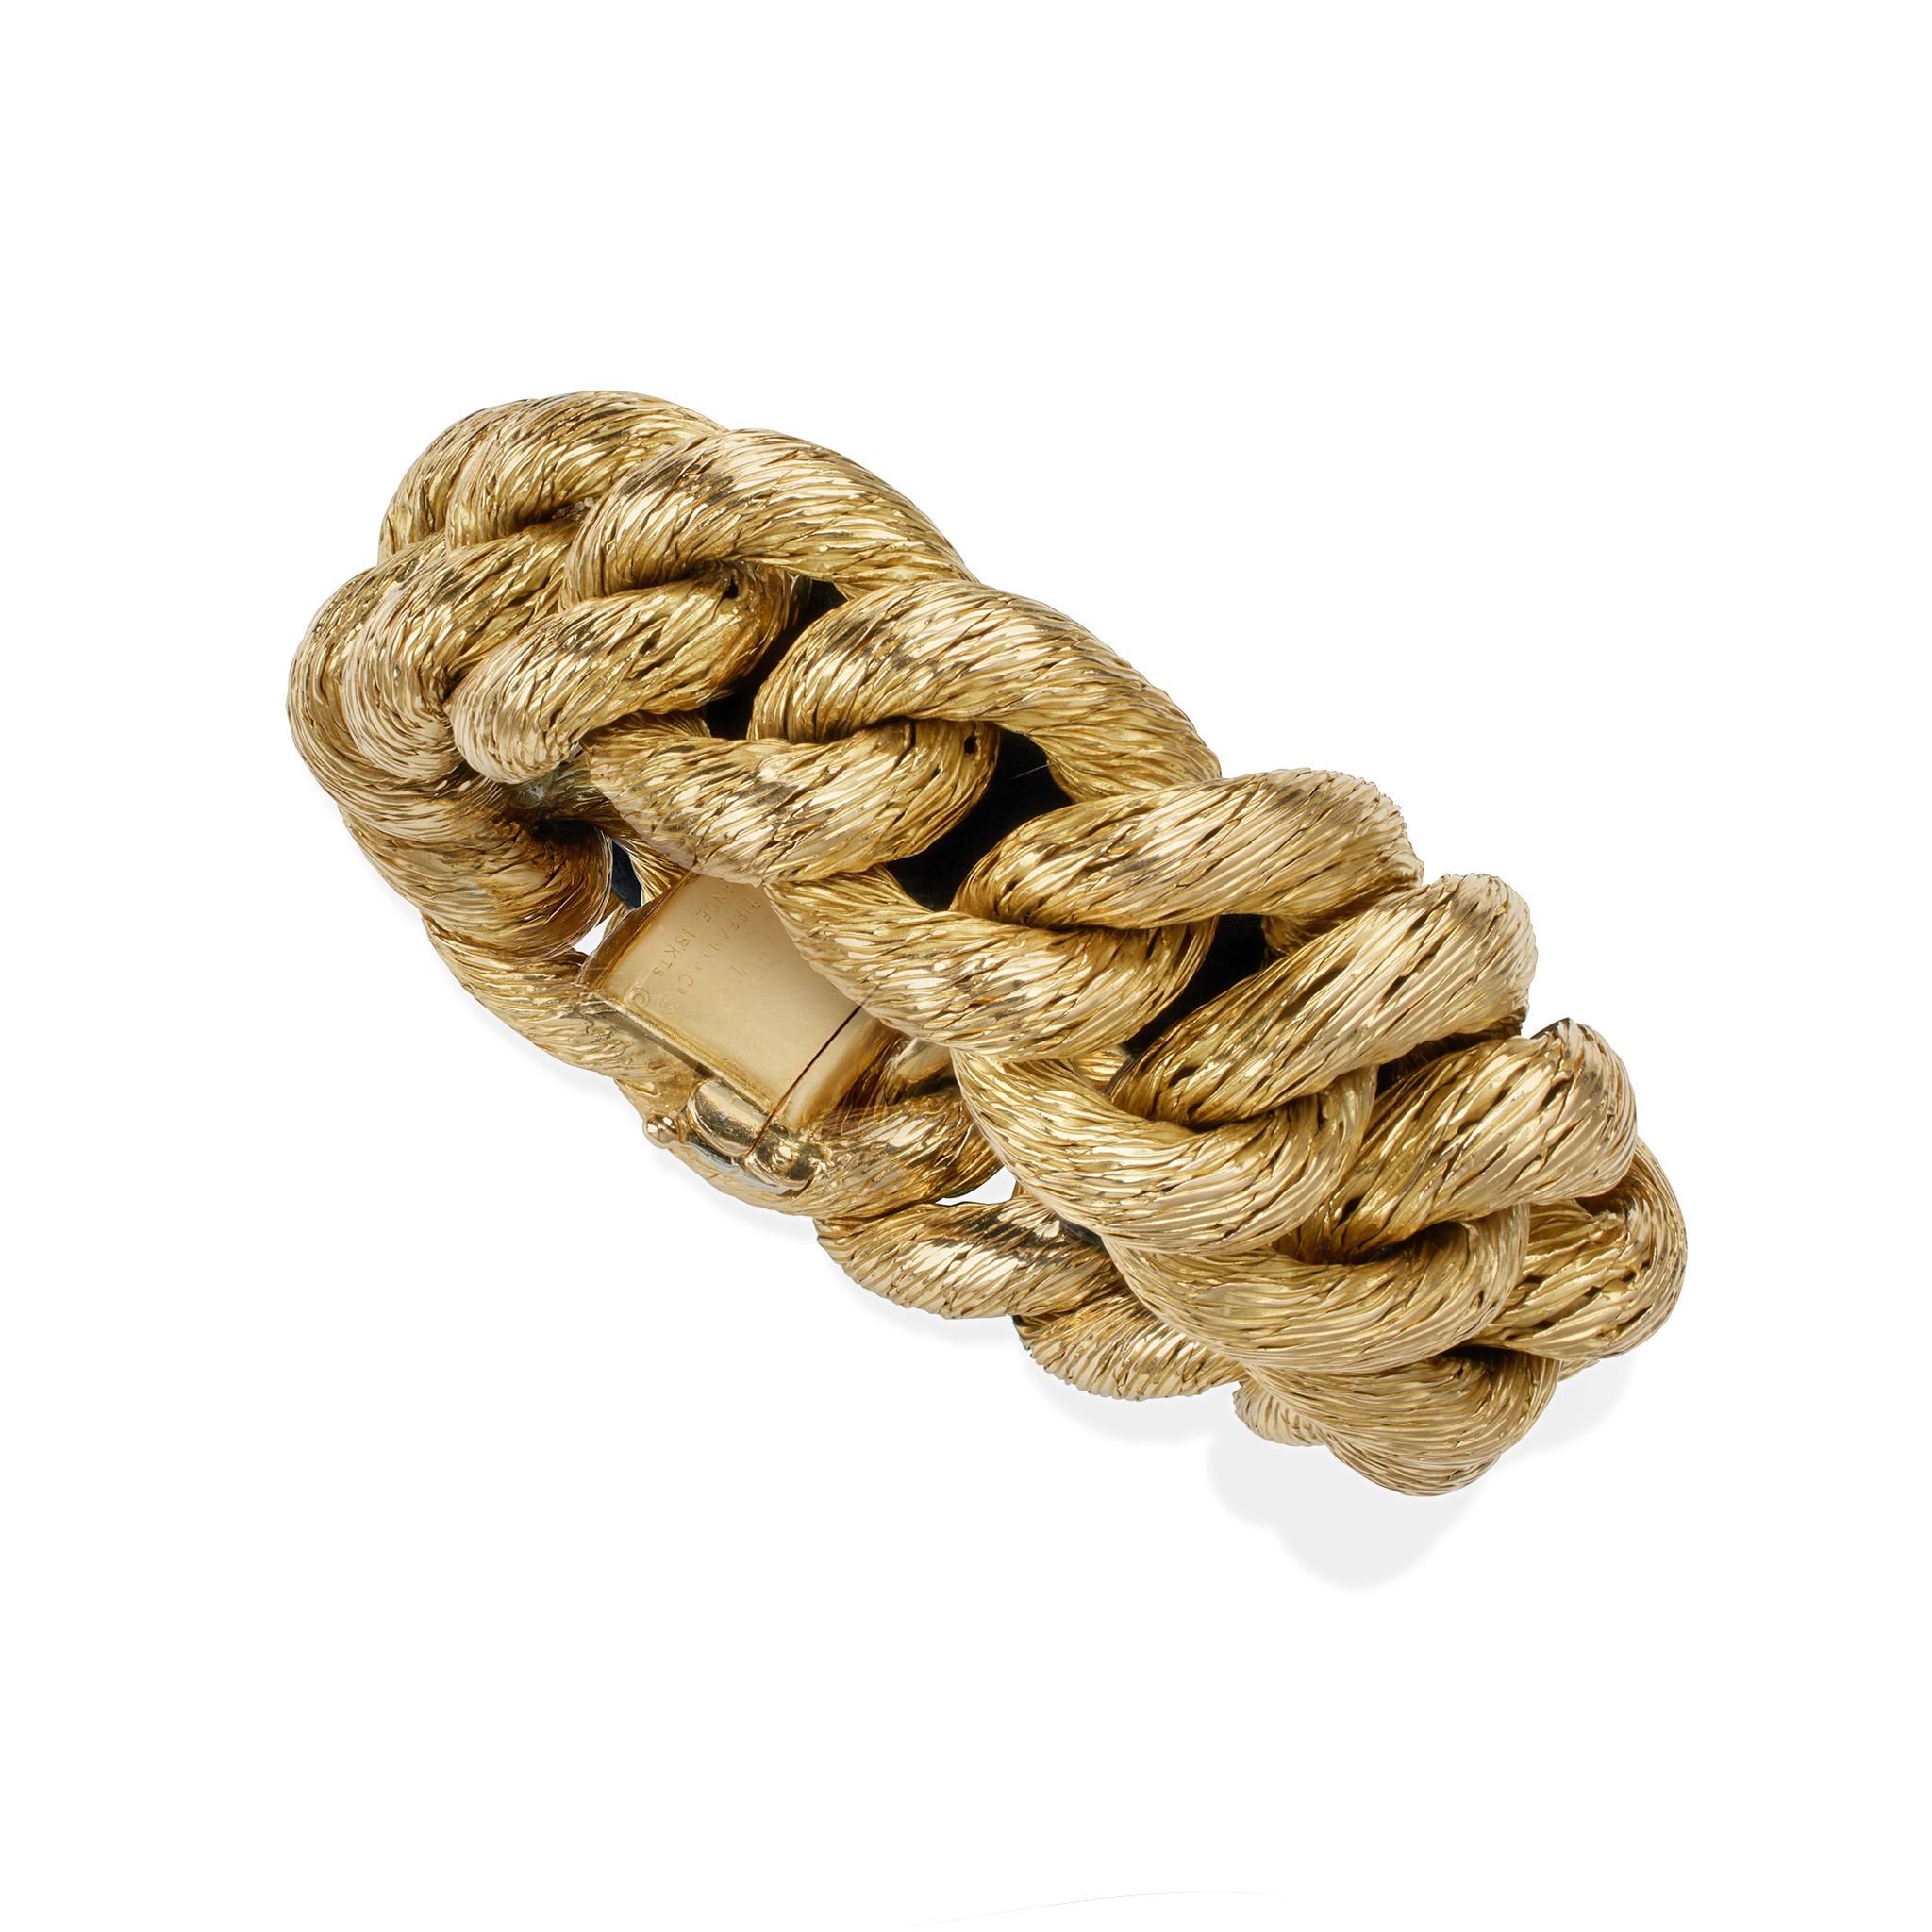 Georges Lenfant Paris for Tiffany & Co. 18K Gold Rope Bracelet In Excellent Condition For Sale In New York, NY